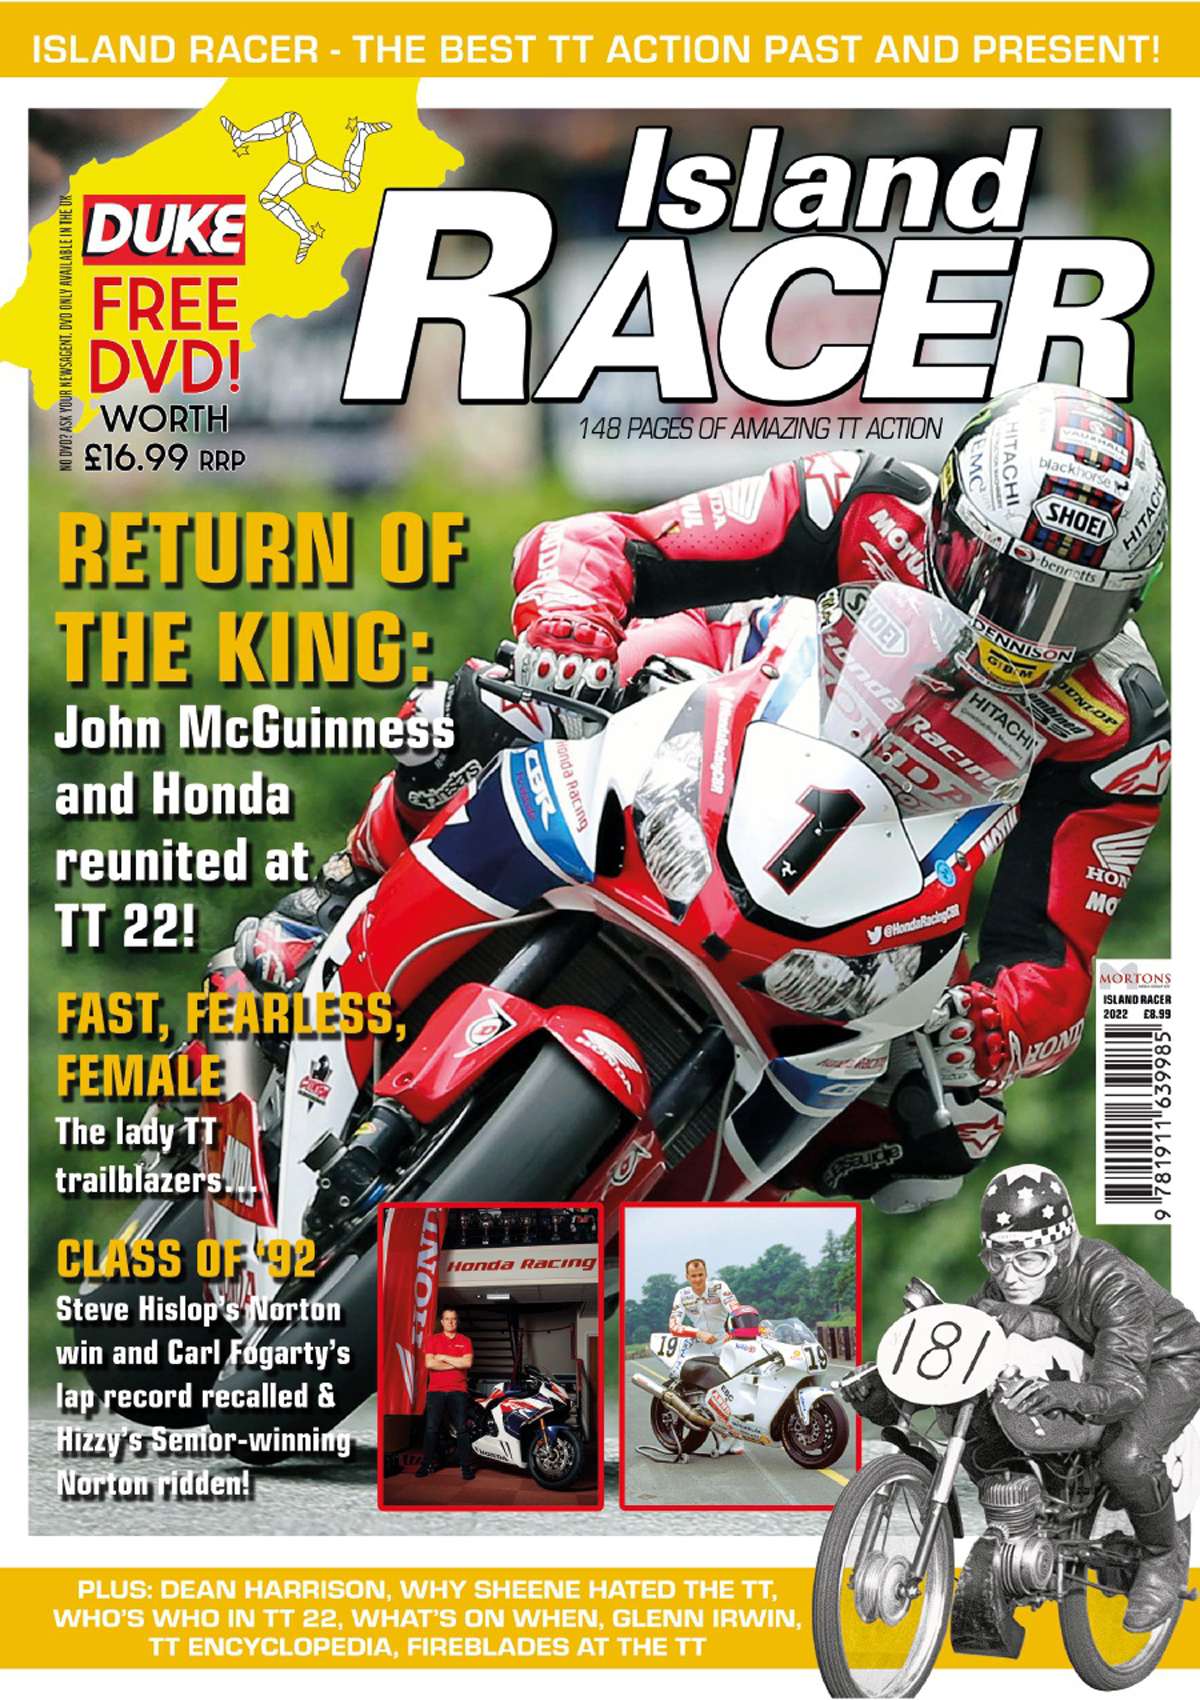 Island Racer 2022 - Your guide to the 2022 Isle of Man TT